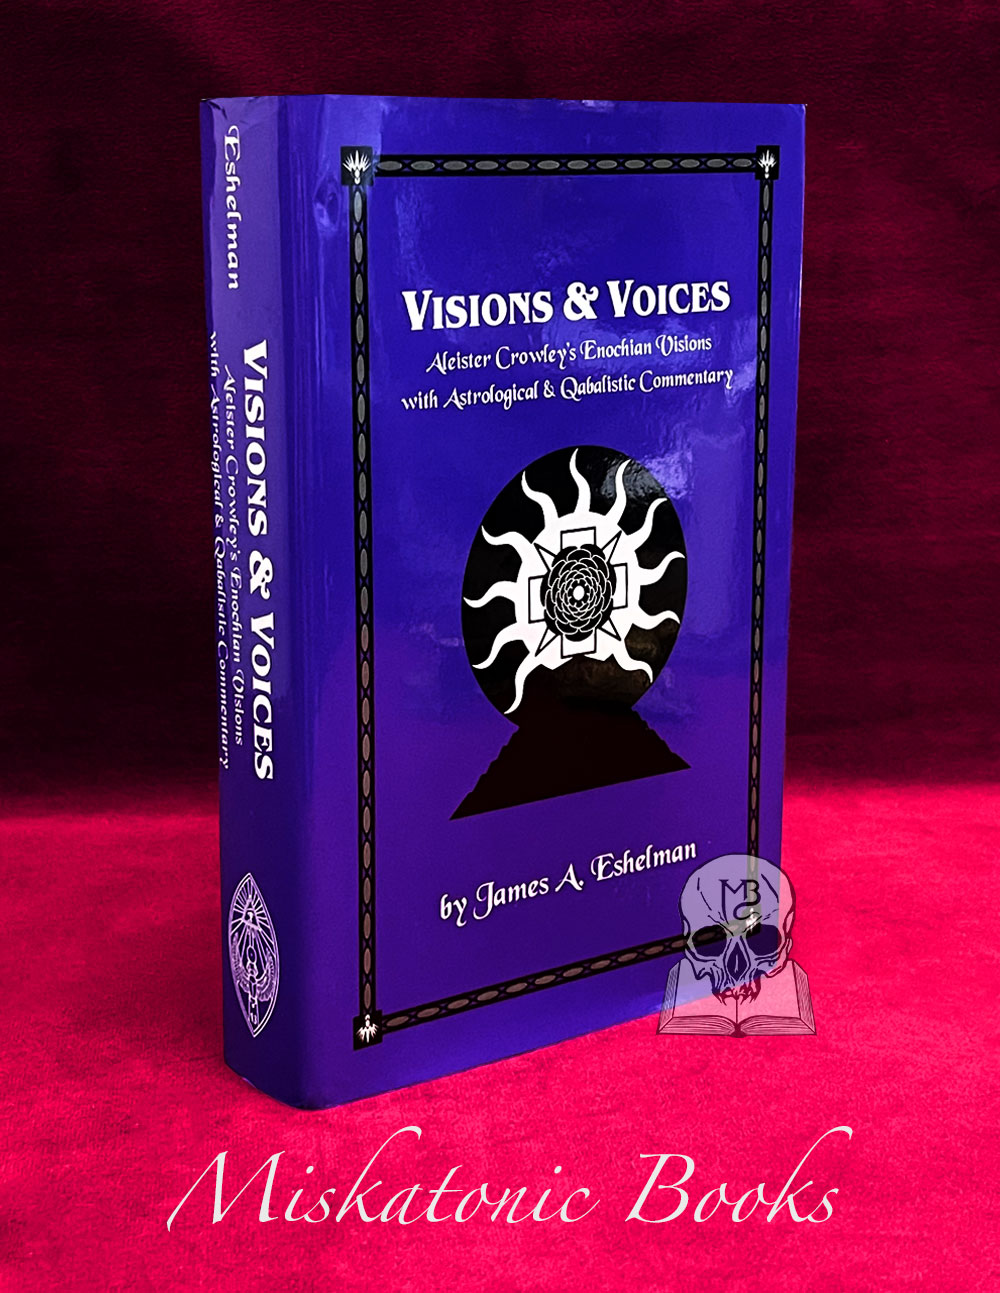 Visions & Voices. Aleister Crowley's Enochian Visions with Astrological and Qabalistic Commentary. by James A Eshalman